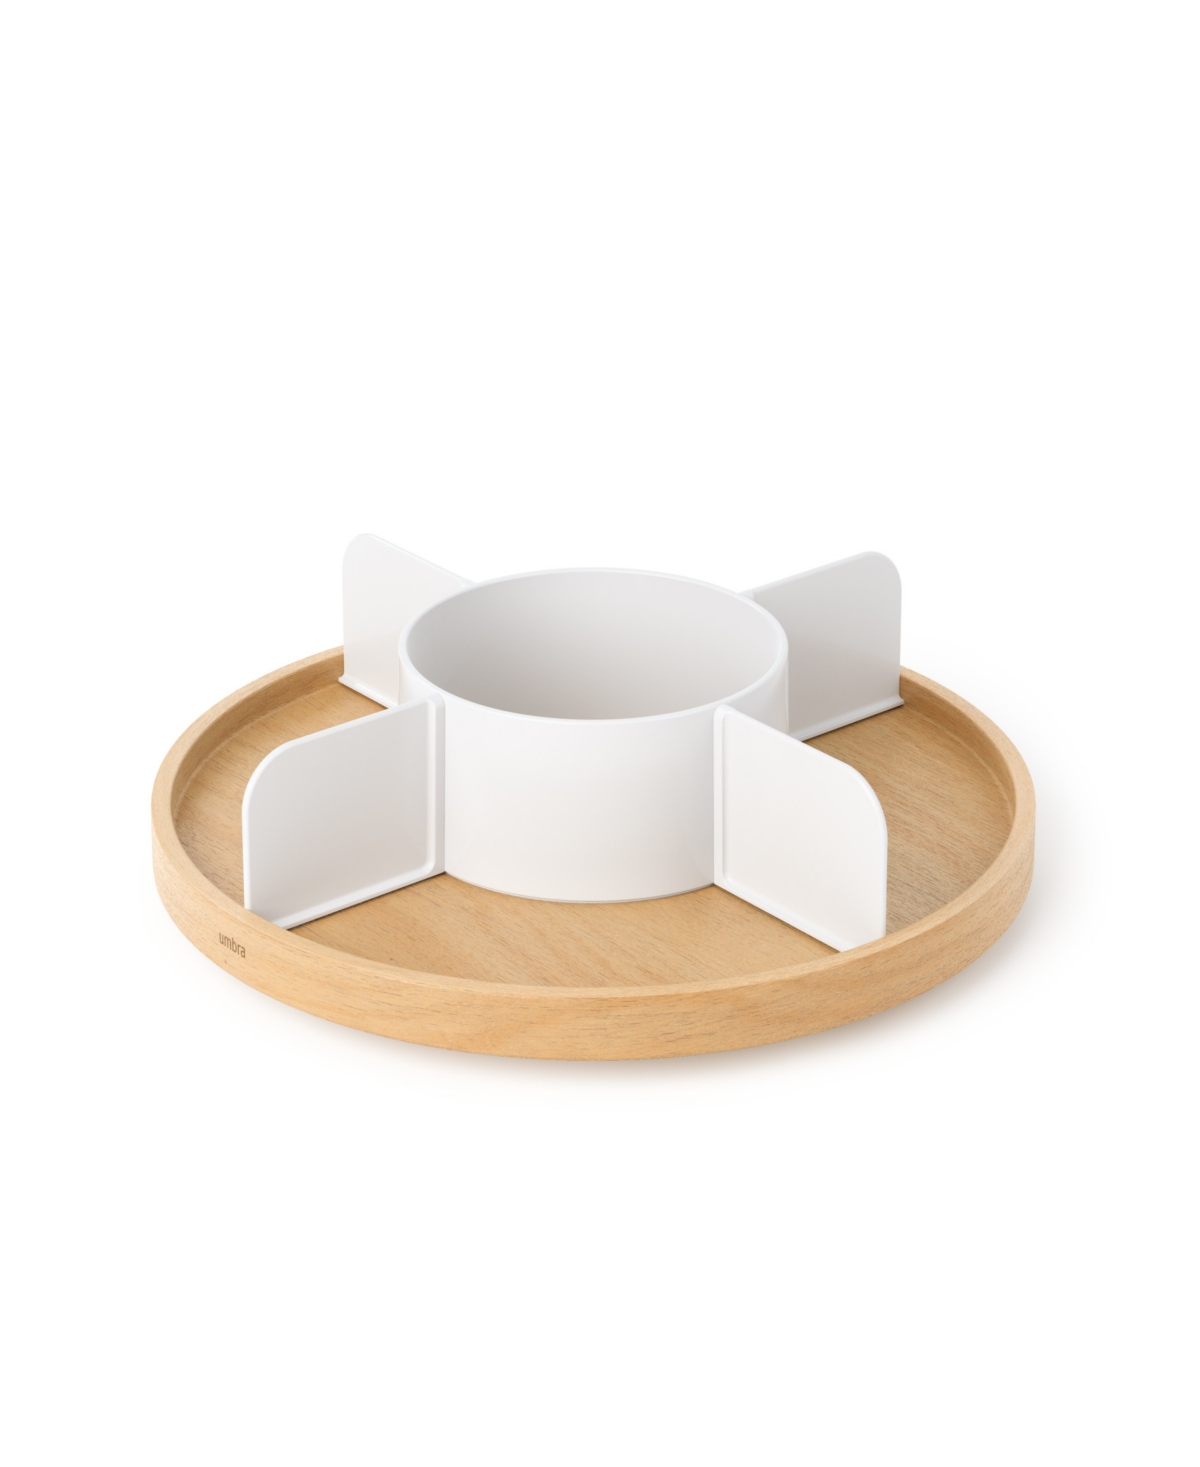 Bellwood Lazy Susan - White, Natural